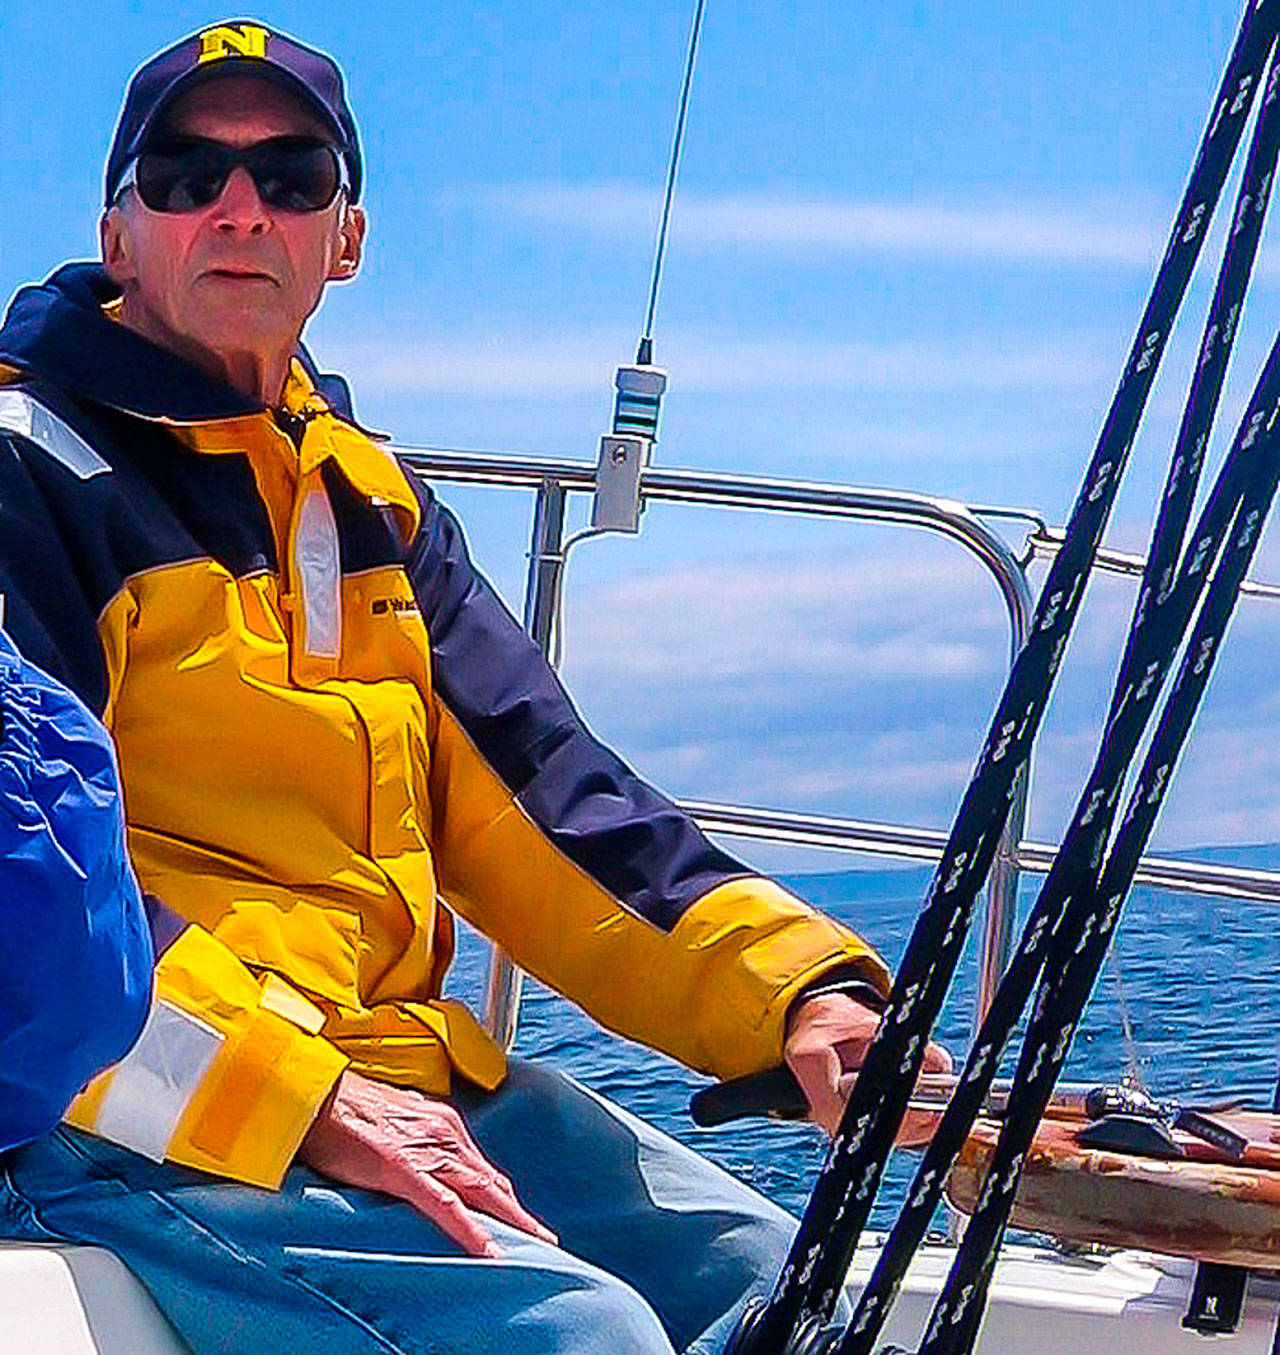 Bob McClinton captains the America in the 2018 Reach and Row for Hospice event. Organizers of the 2019 event have dedicated this year’s sailing race to the late McClinton, who raised more than $100,000 for Volunteer Hospice of Clallam County through the annual fundraiser. Submitted photo